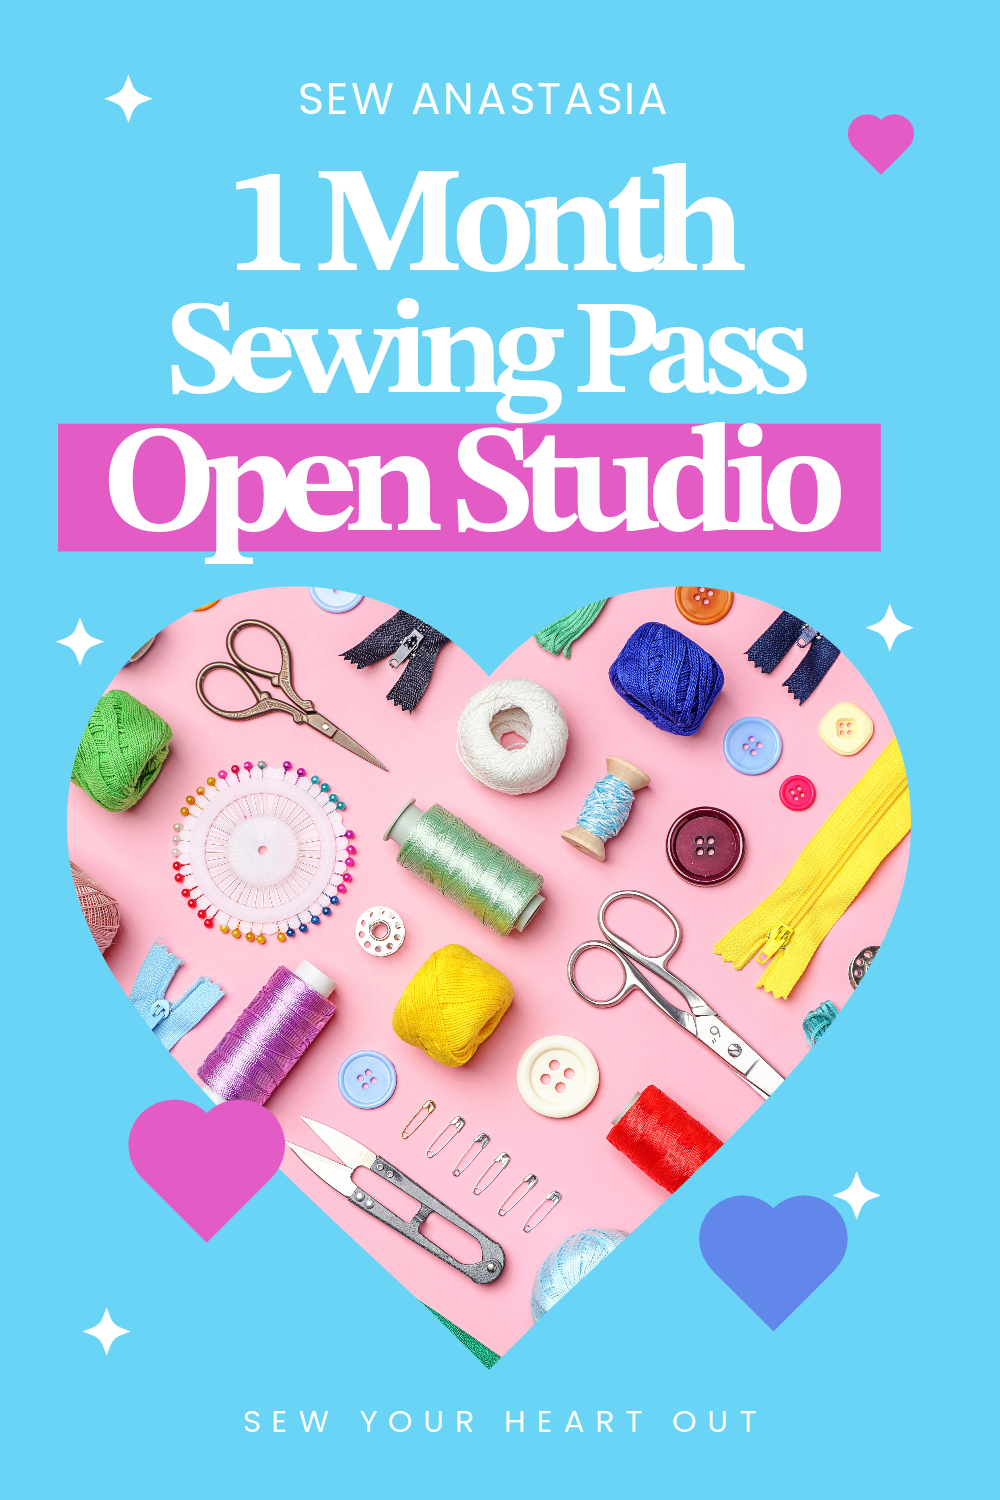 1 month UNLIMITED Open Studio Pass